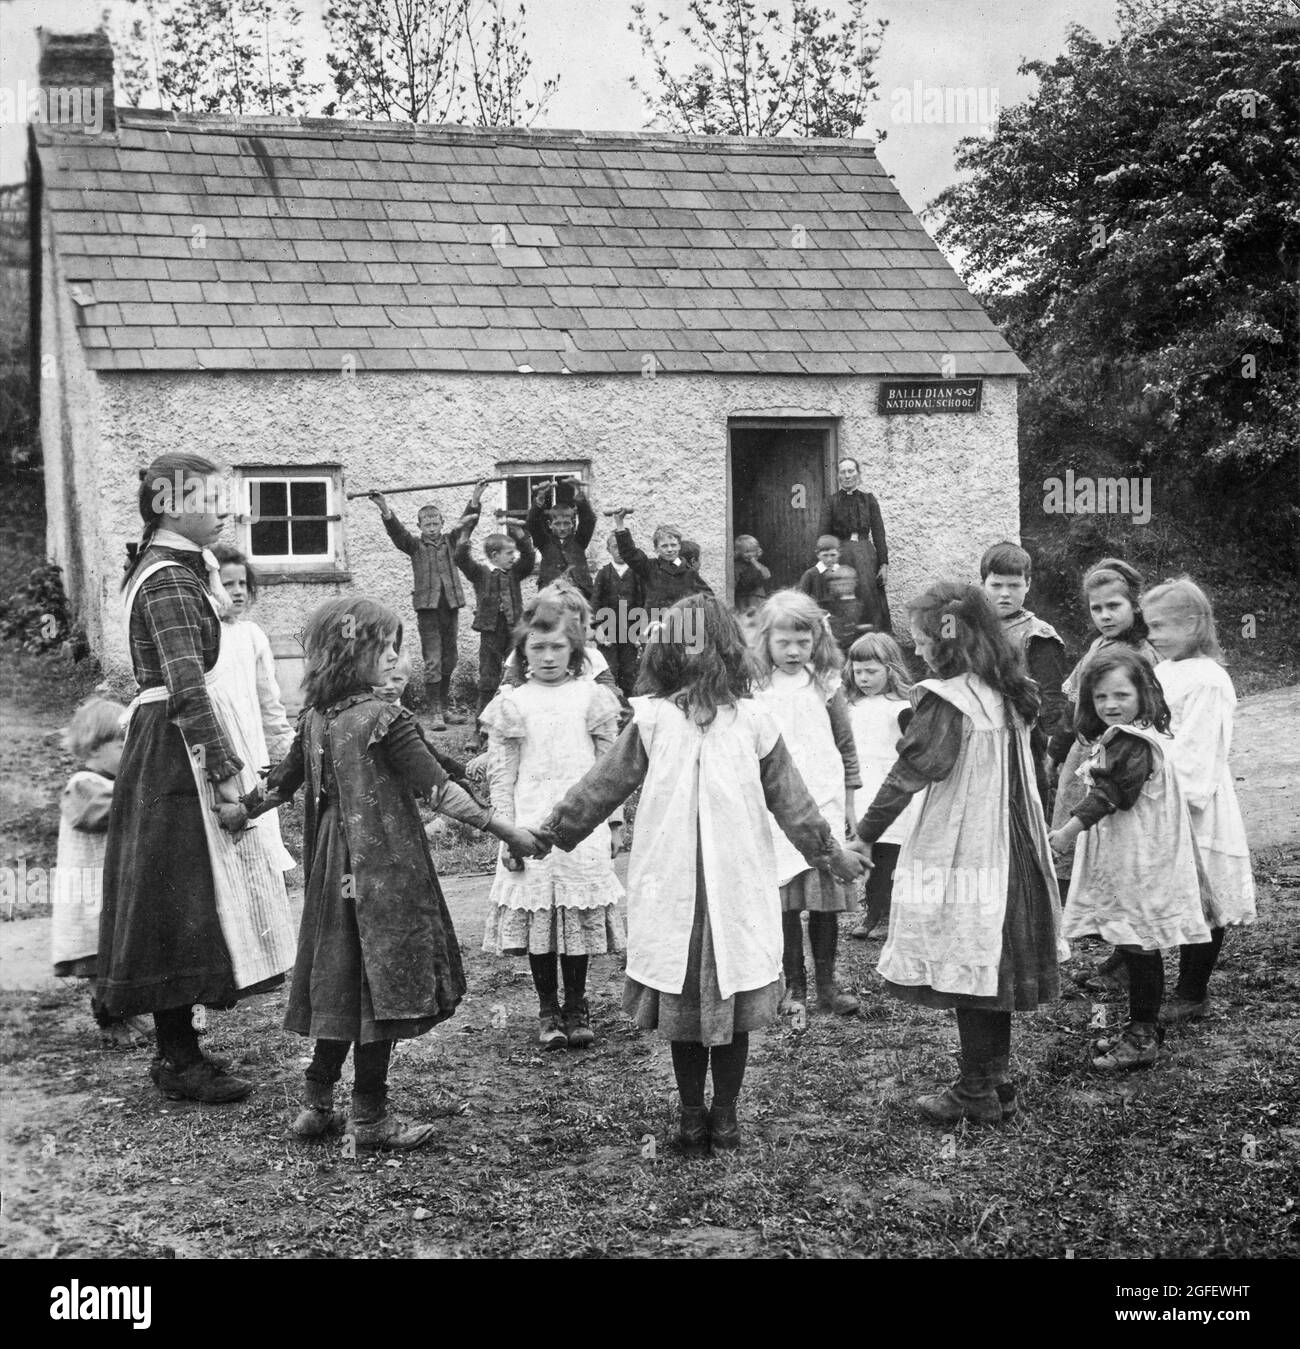 Children at play during the early 20th century at Ballidian National School, Ballybay in County Monaghan, Ireland. The girls playing ‘Green grow the rushes, O’ while boys do gymnastic exercises watched over by their teacher. Stock Photo